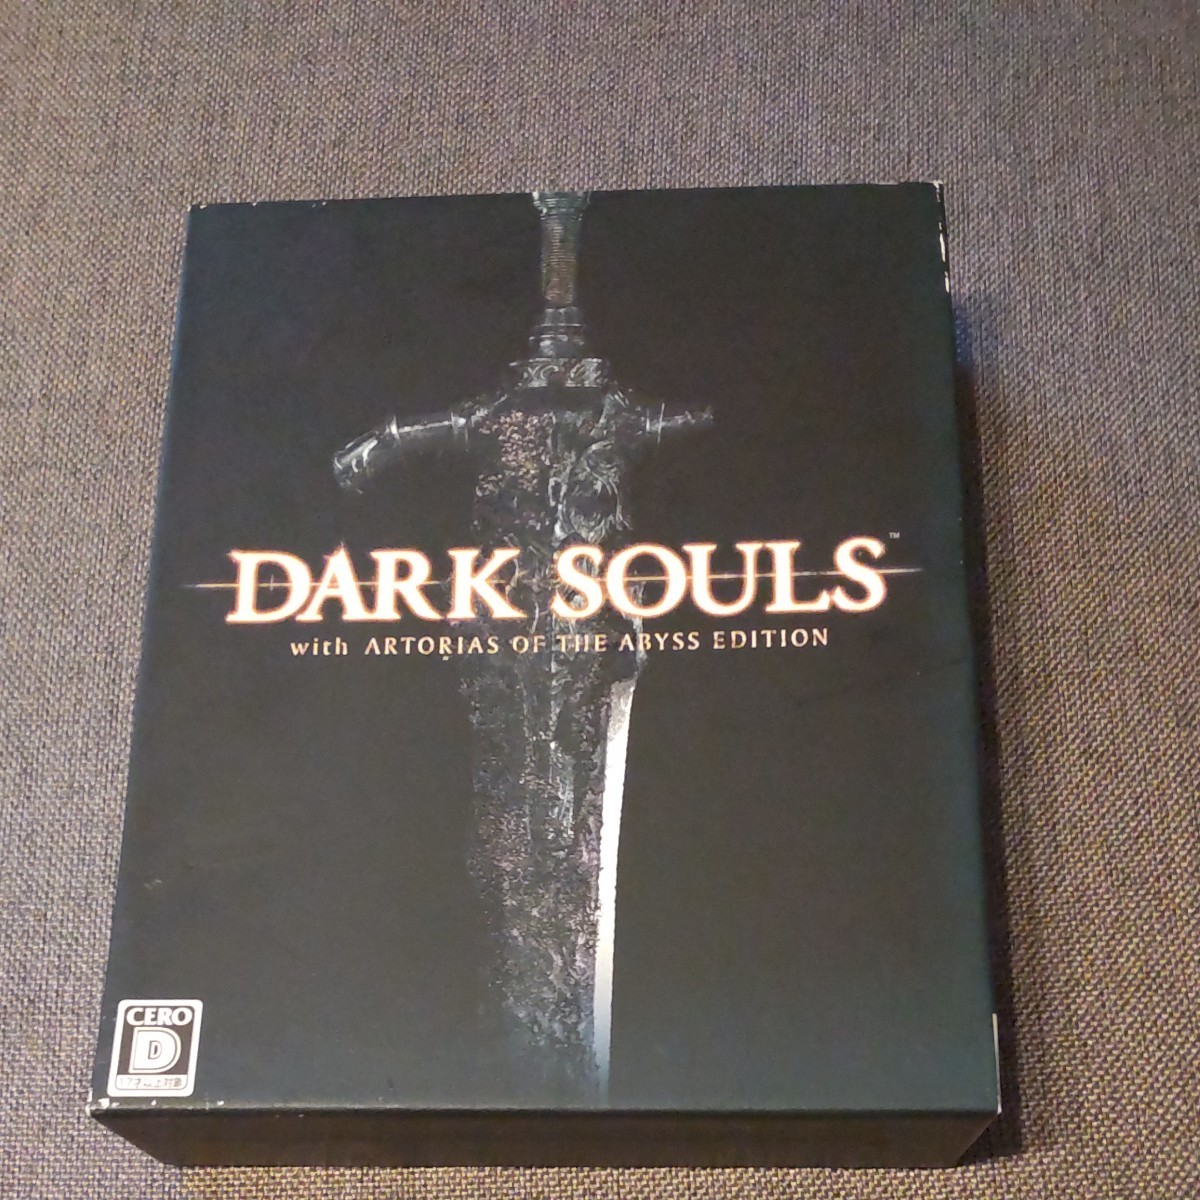 DARK SOULS with ARTORIAS OF THE ABYSS EDITION (特典なし) - PS3